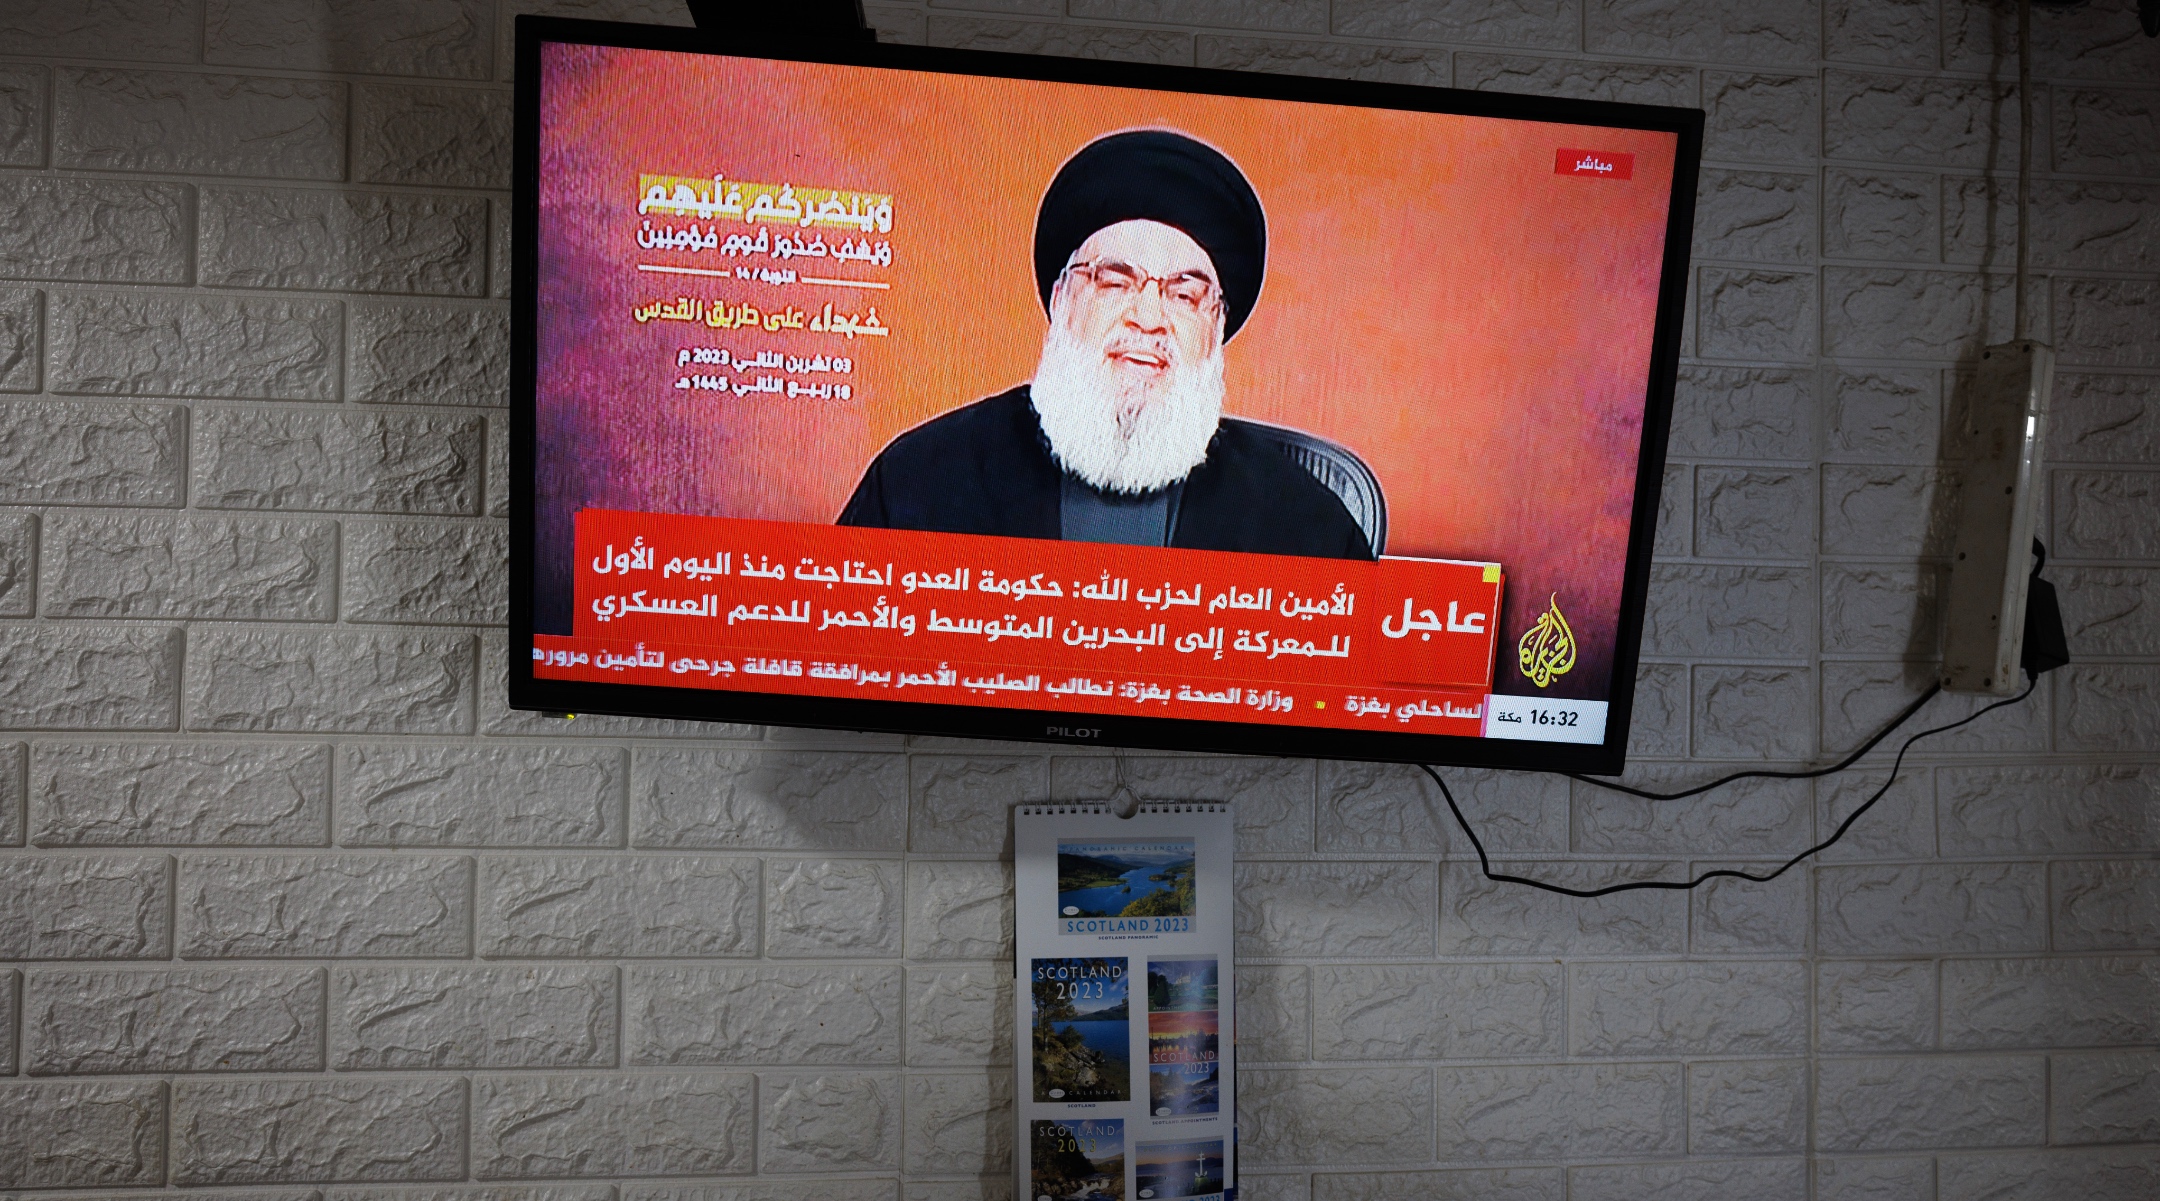 A live televised speech by Lebanon’s Hezbollah chief Hasan Nasrallah, on a TV in the Old City of Jerusalem, Nov. 3, 2023. (Dan Kitwood/Getty Images)